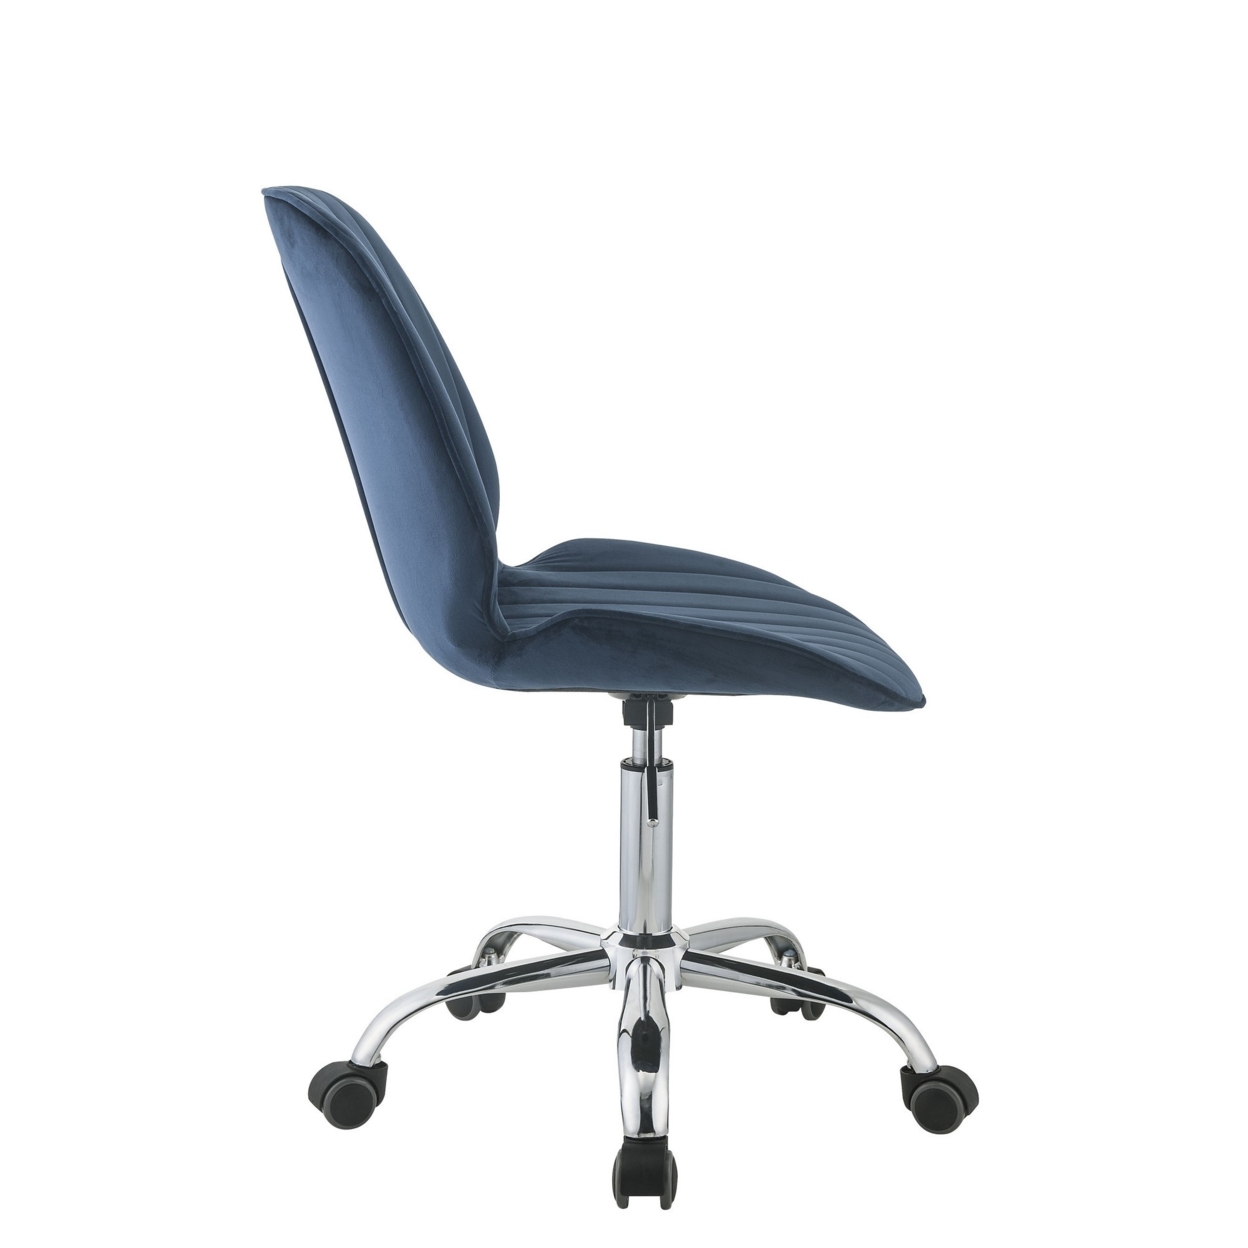 Adjustable Office Chair With Channel Stitching, Blue And Chrome- Saltoro Sherpi